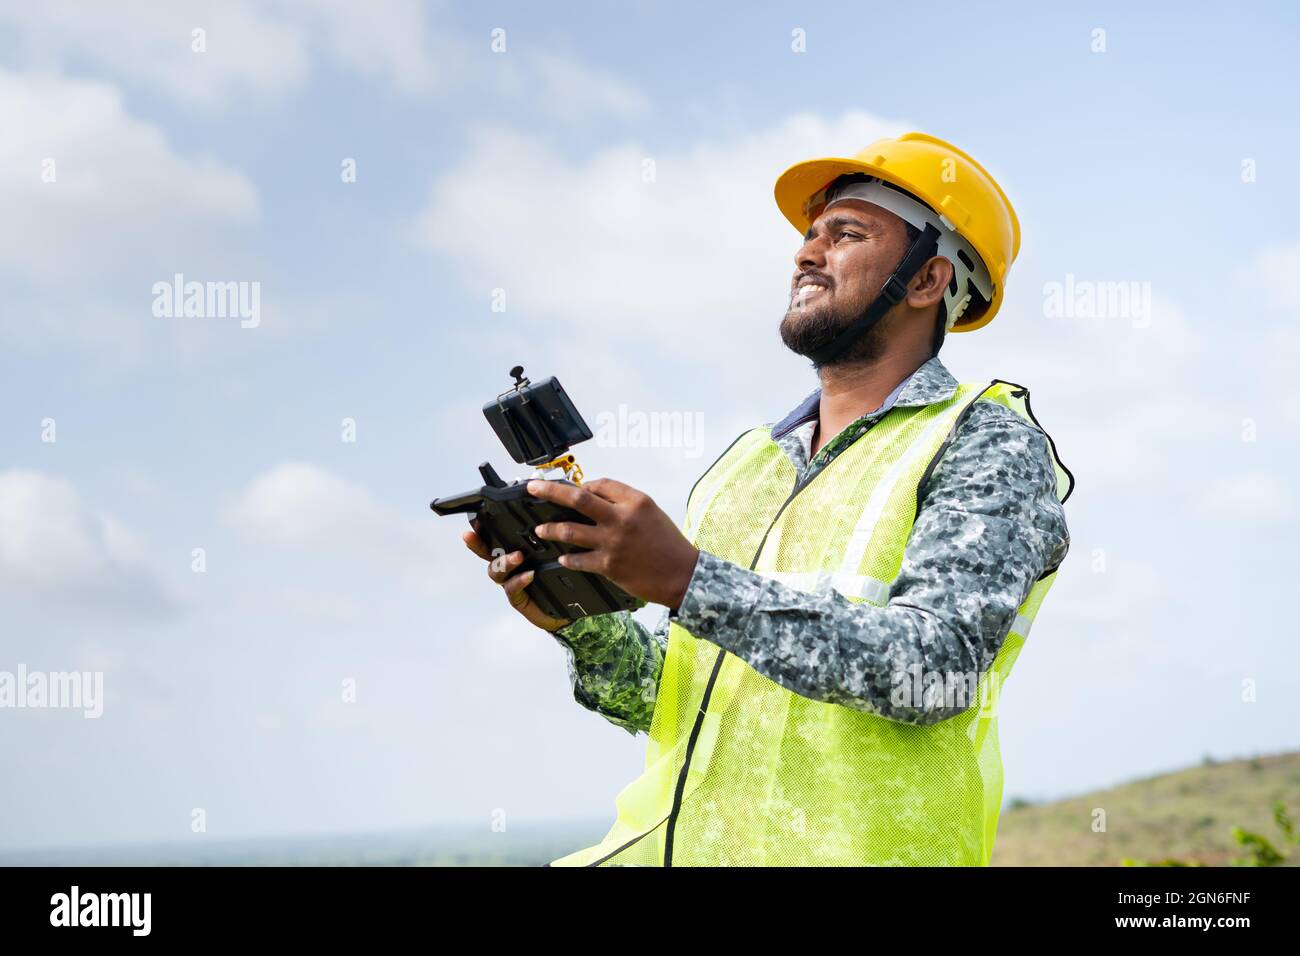 Drone pilot with safety helmet operating drone using remote controller -  concept of engineer using drone technology to survey land Stock Photo -  Alamy